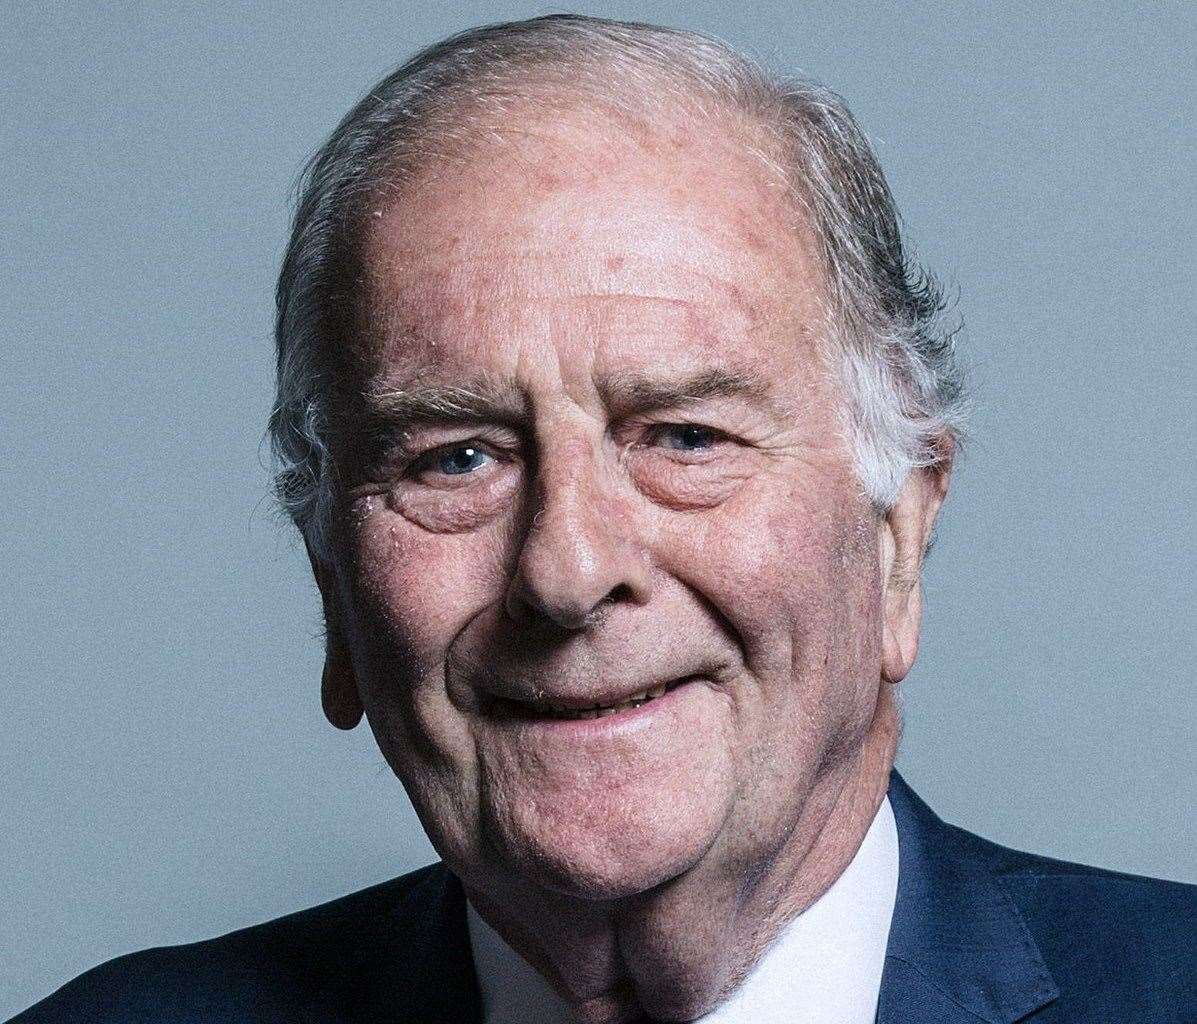 North Thanet MP Sir Roger Gale